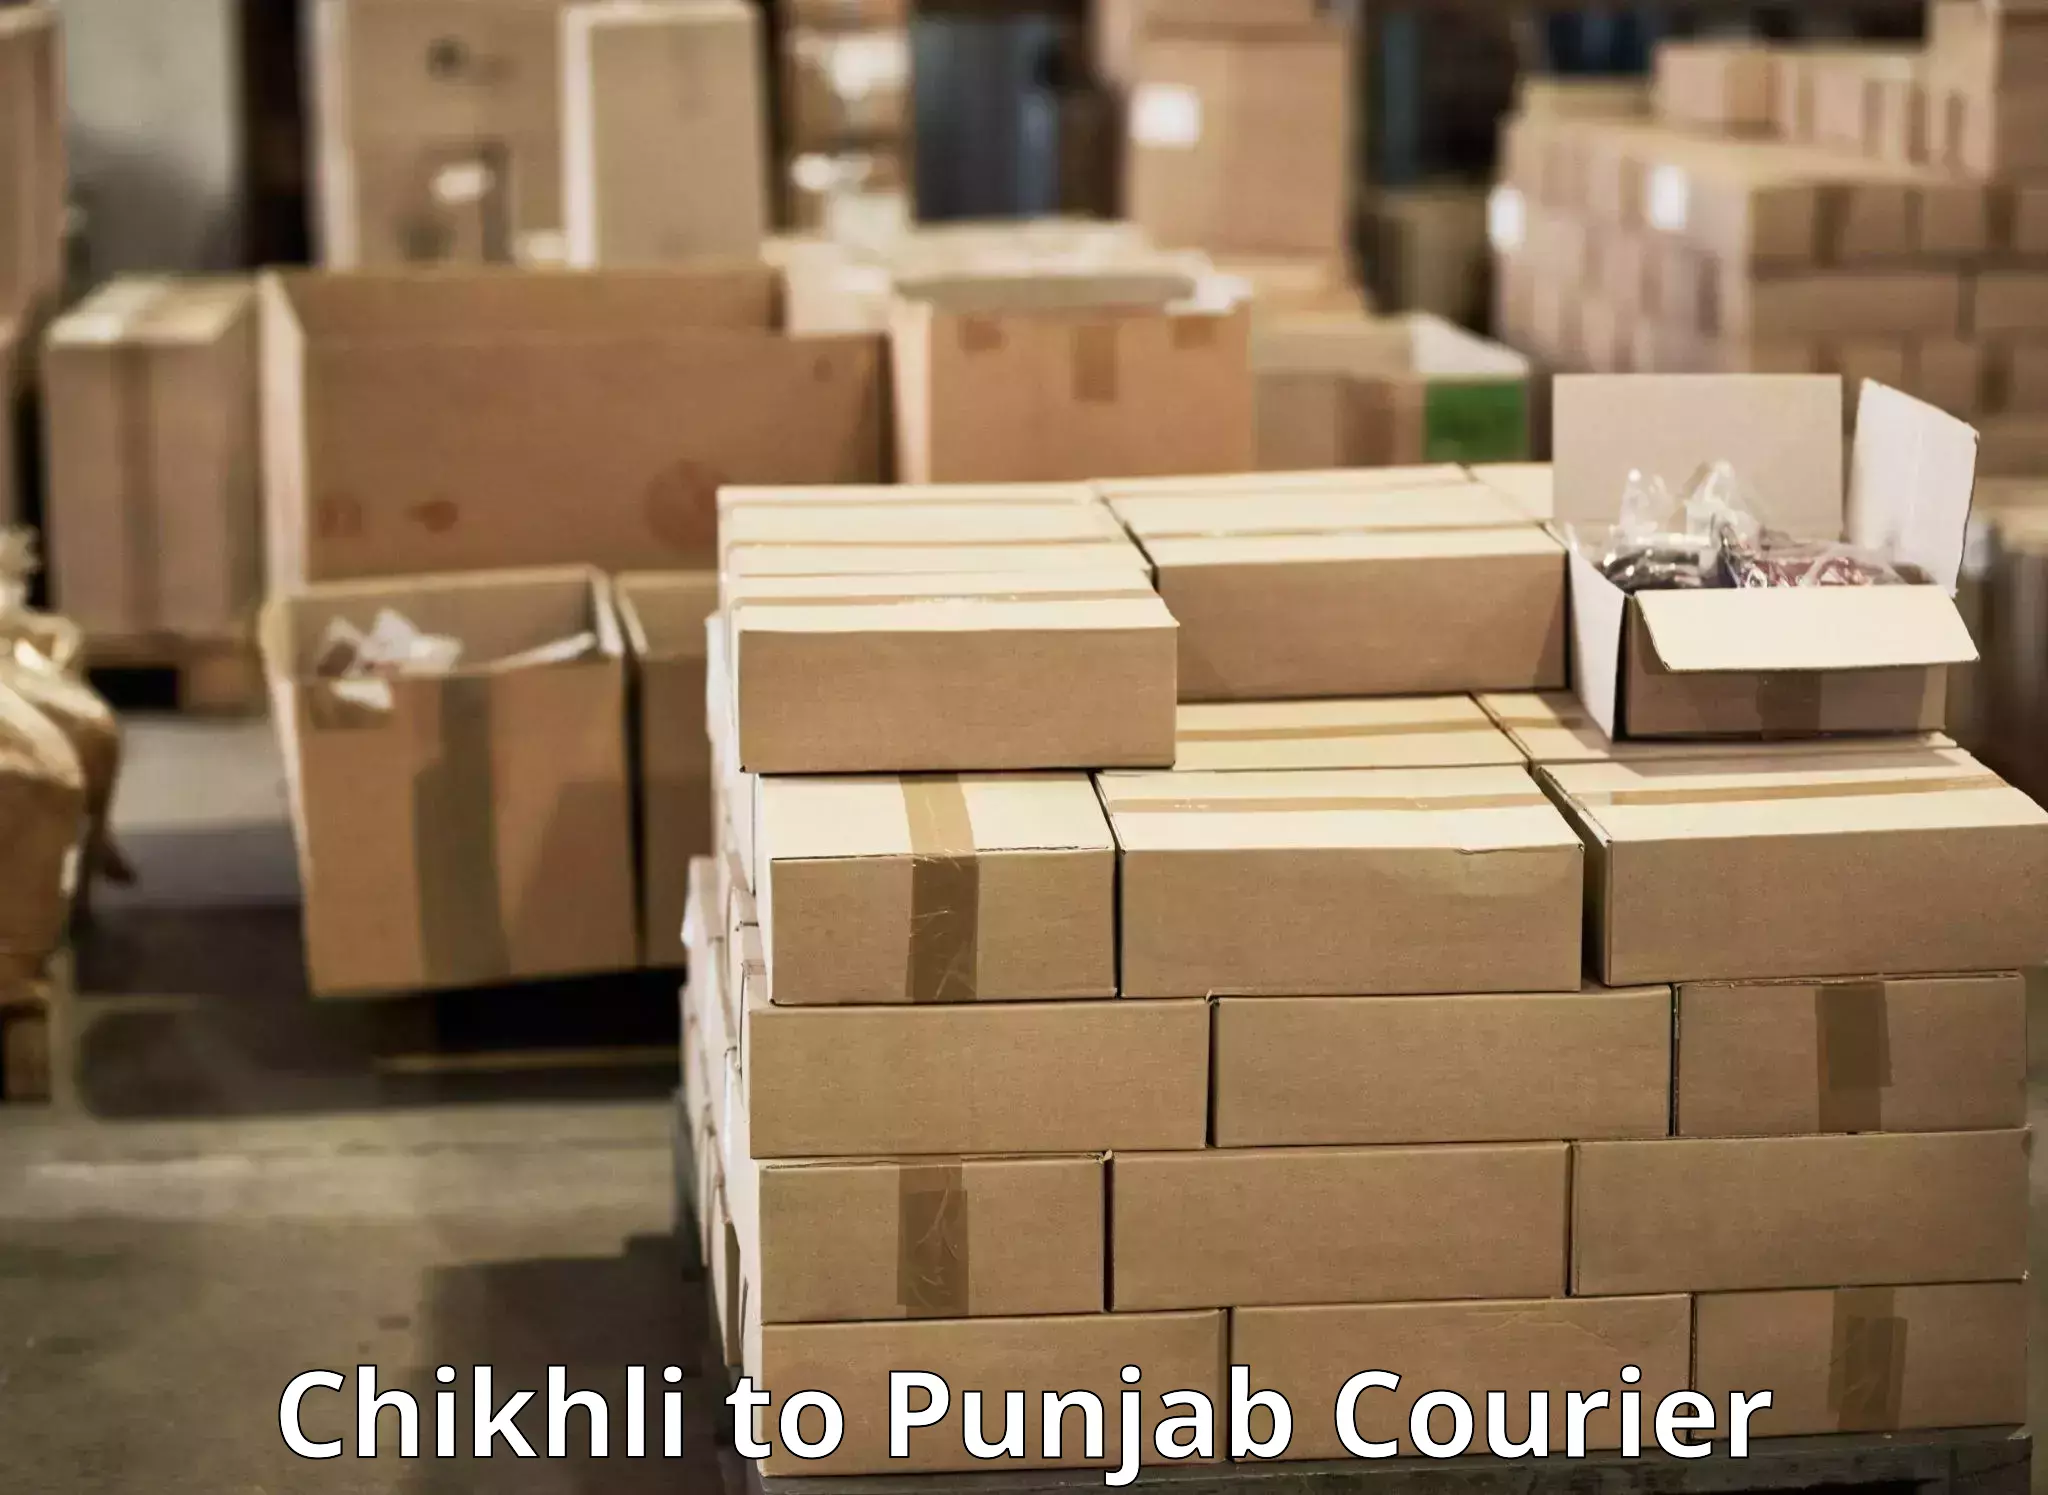 Cash on delivery service Chikhli to Beas